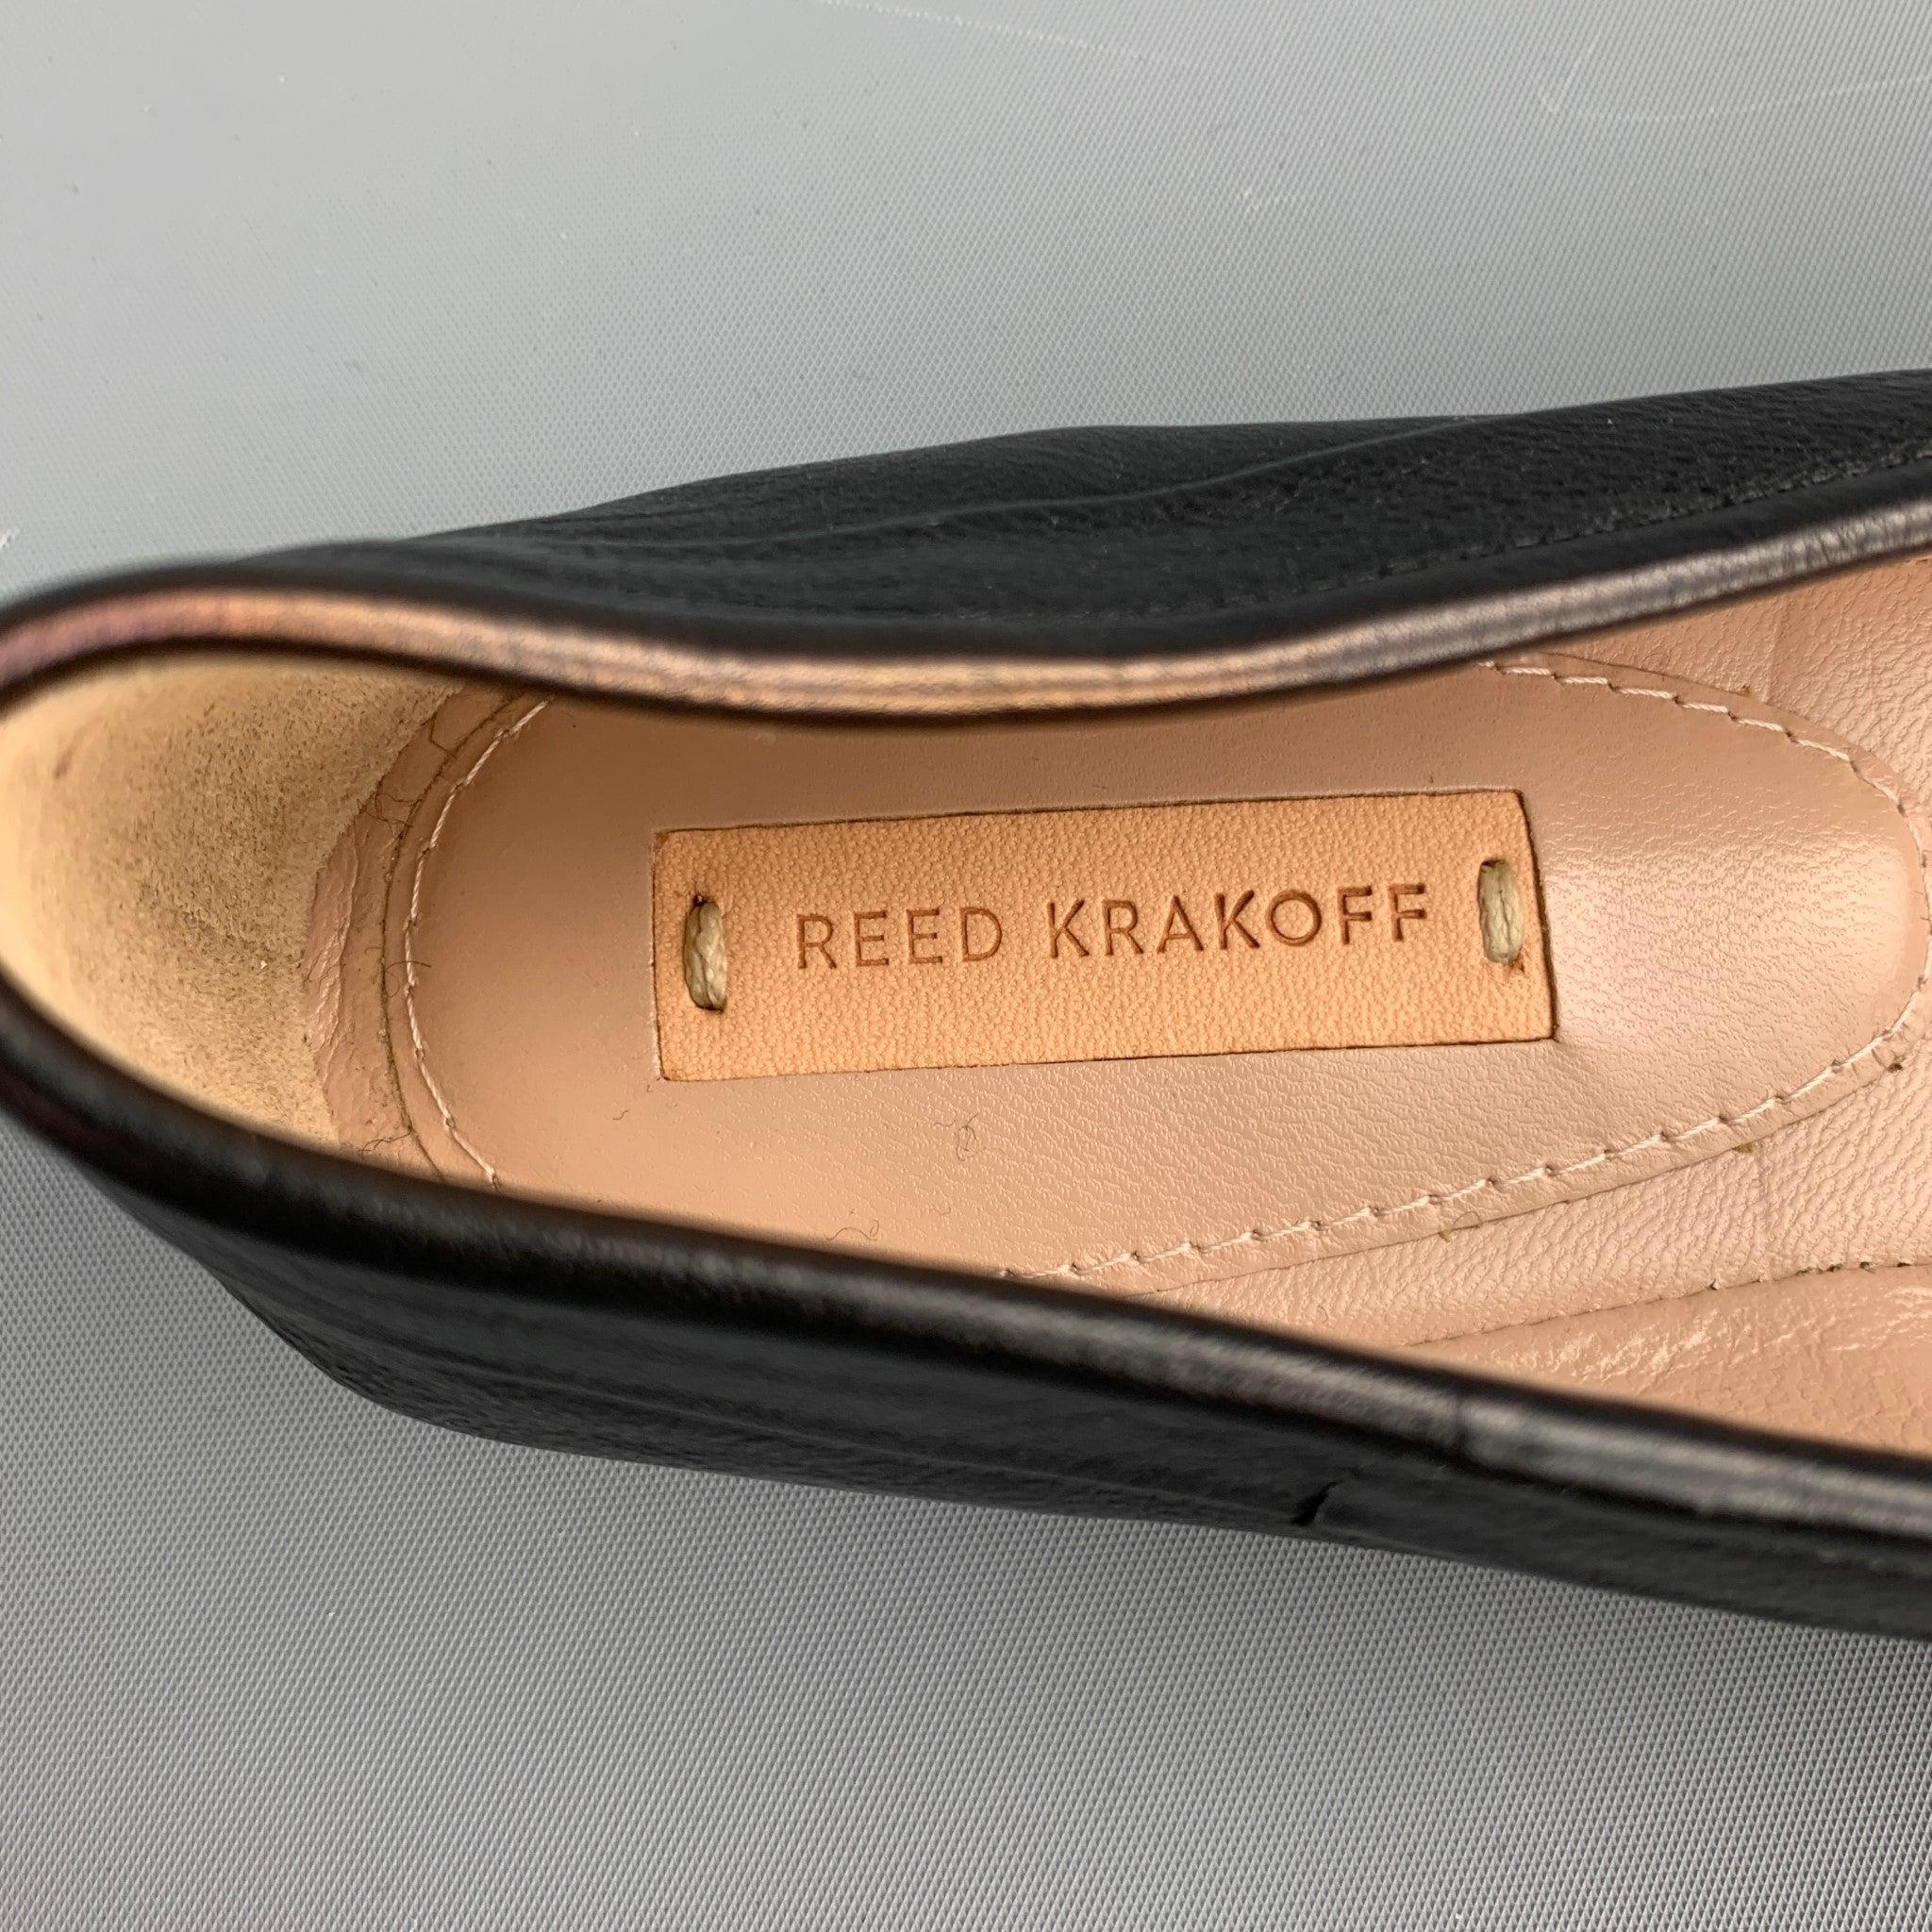 REED KRAKOFF Size 7.5 Black & Beige Two Tone Leather Cap Toe Flats For Sale 2